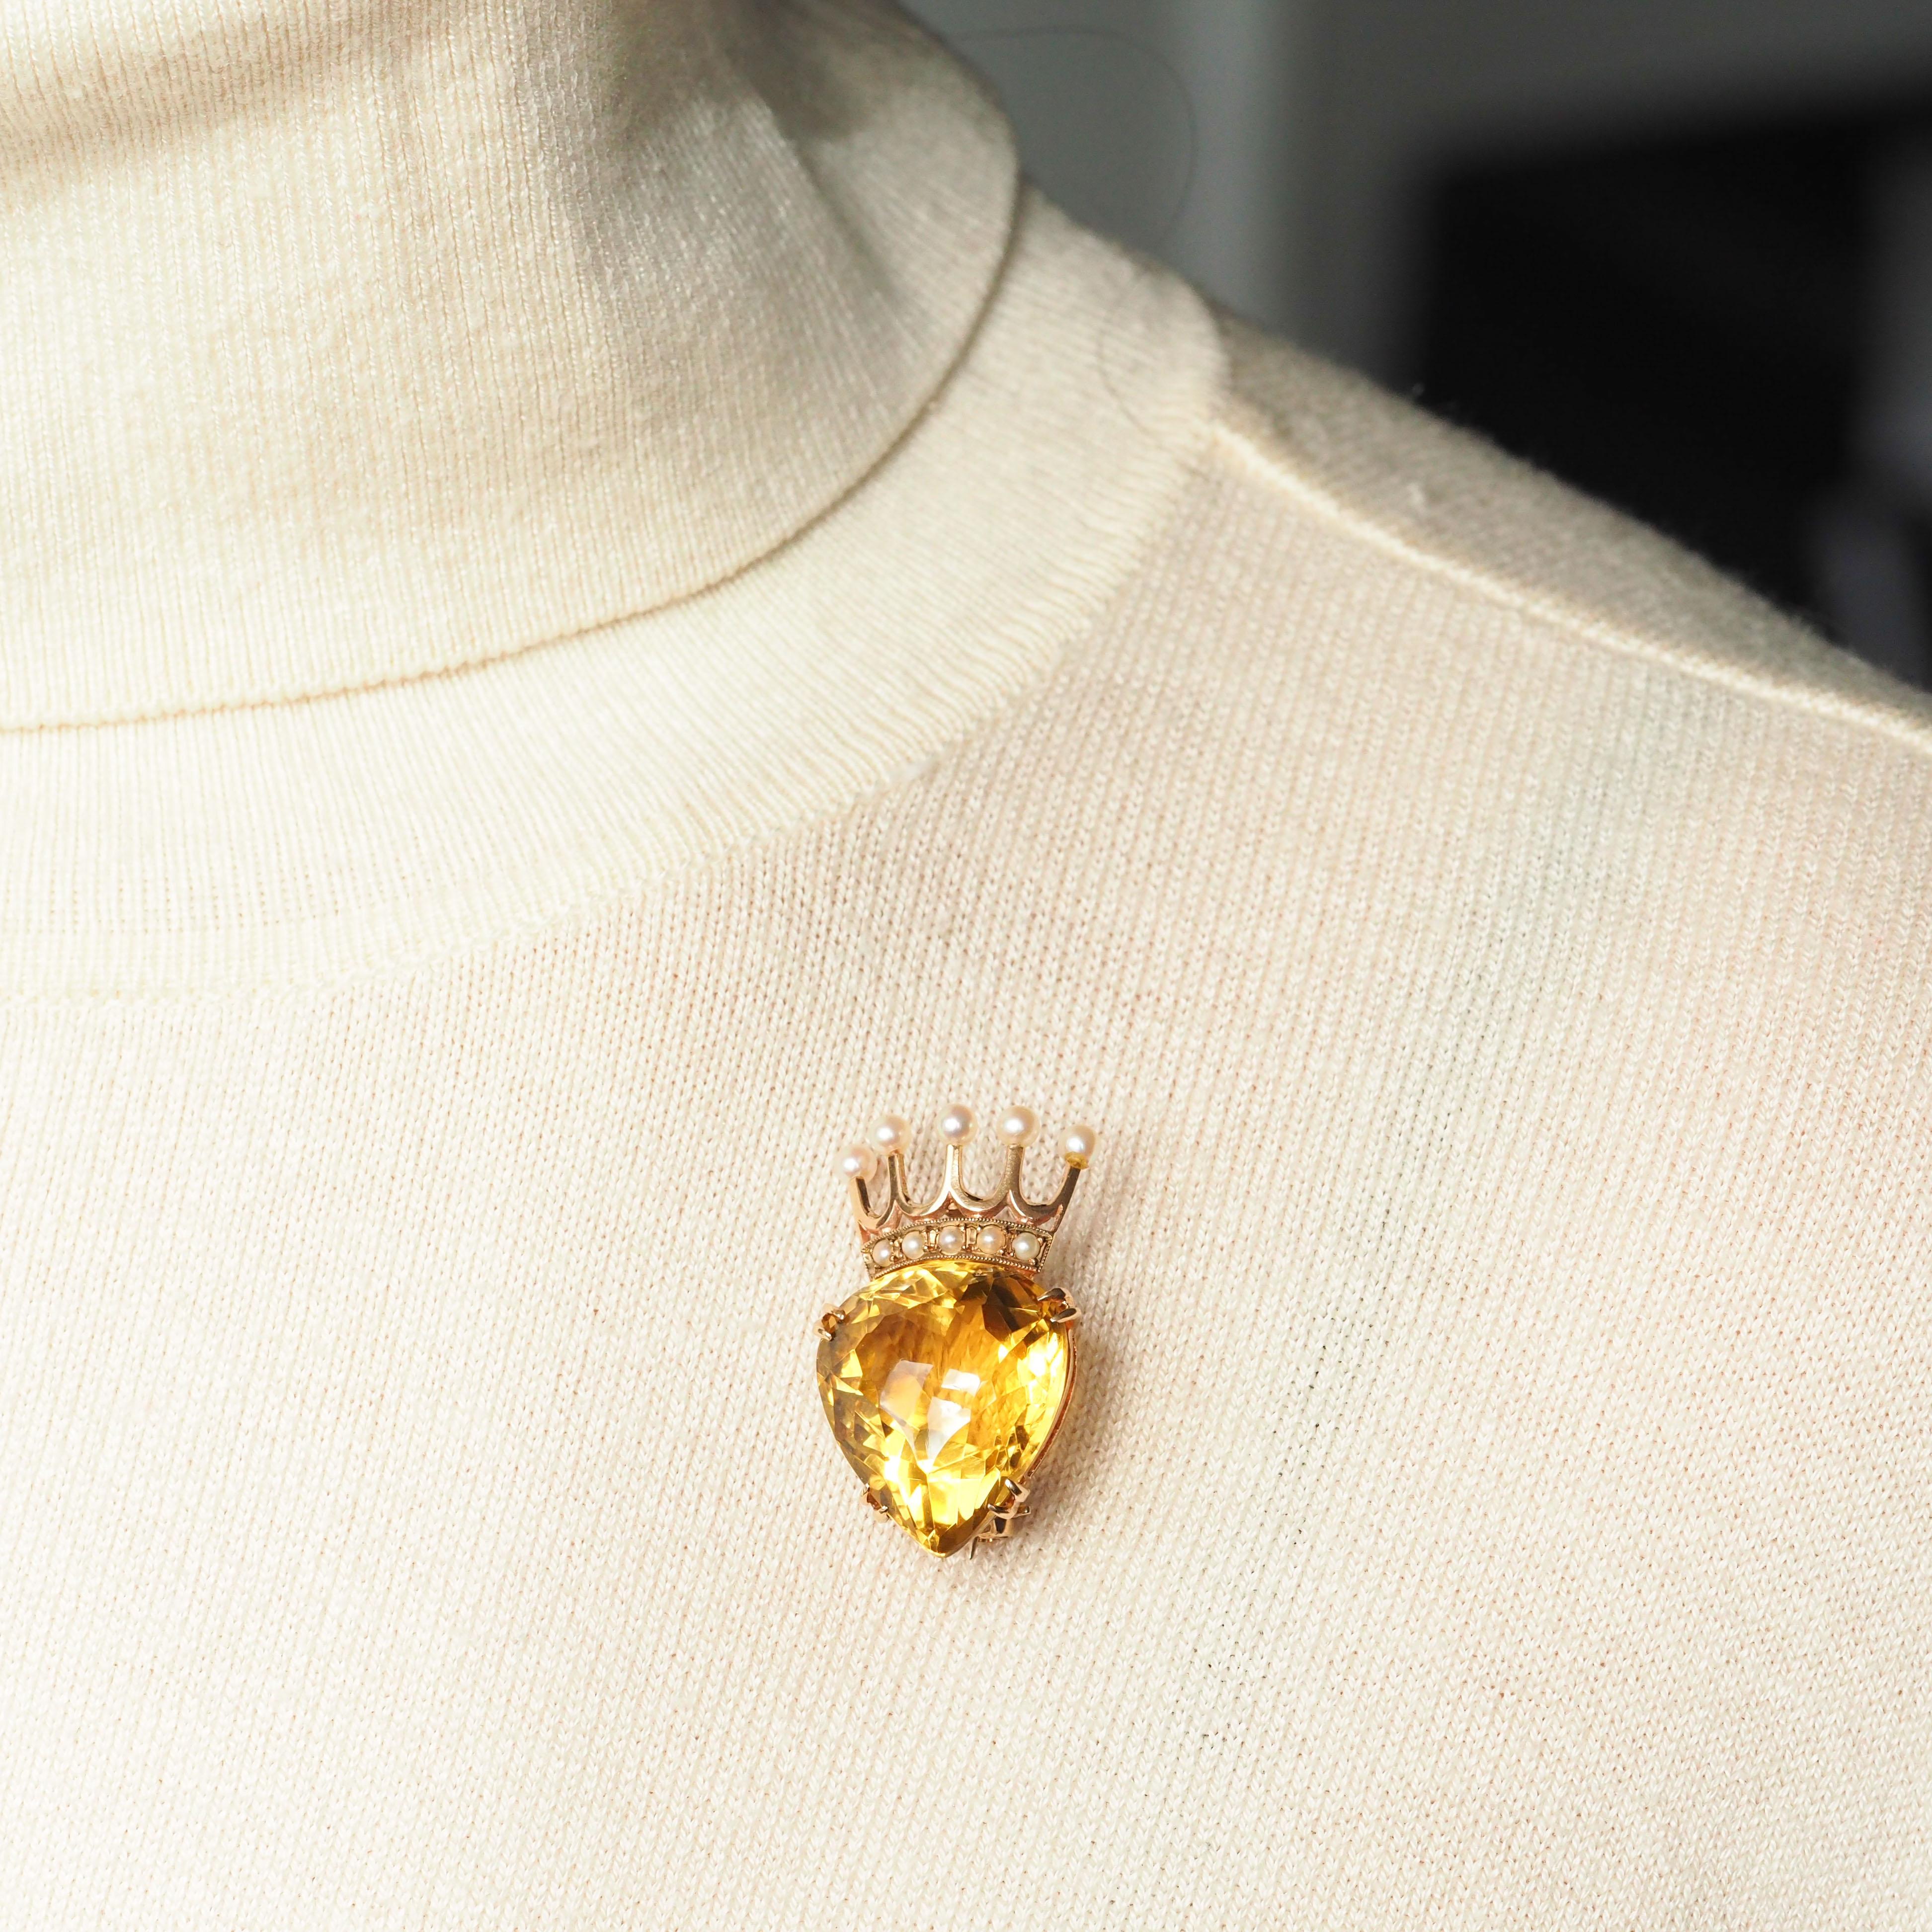 A Citrine & Pearl Pendant Necklace/Brooch 14K Gold Heart Coronet Crown  3